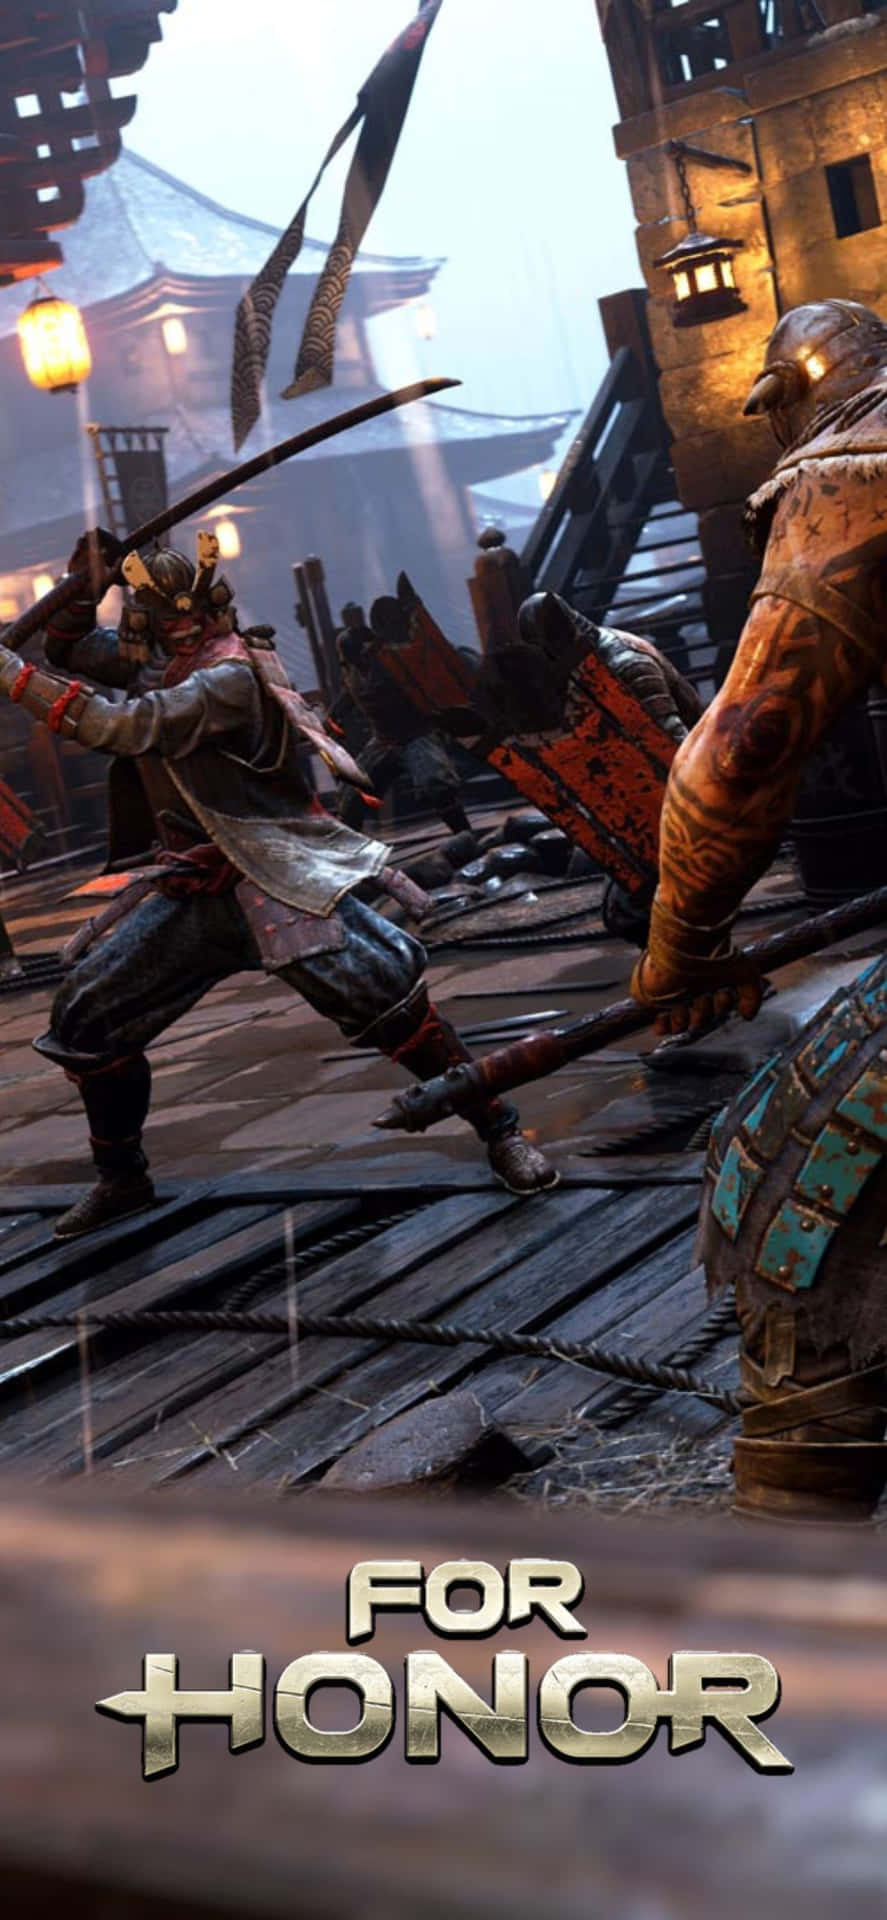 Play the immersive action-packed game For Honor on your iPhone XS Max